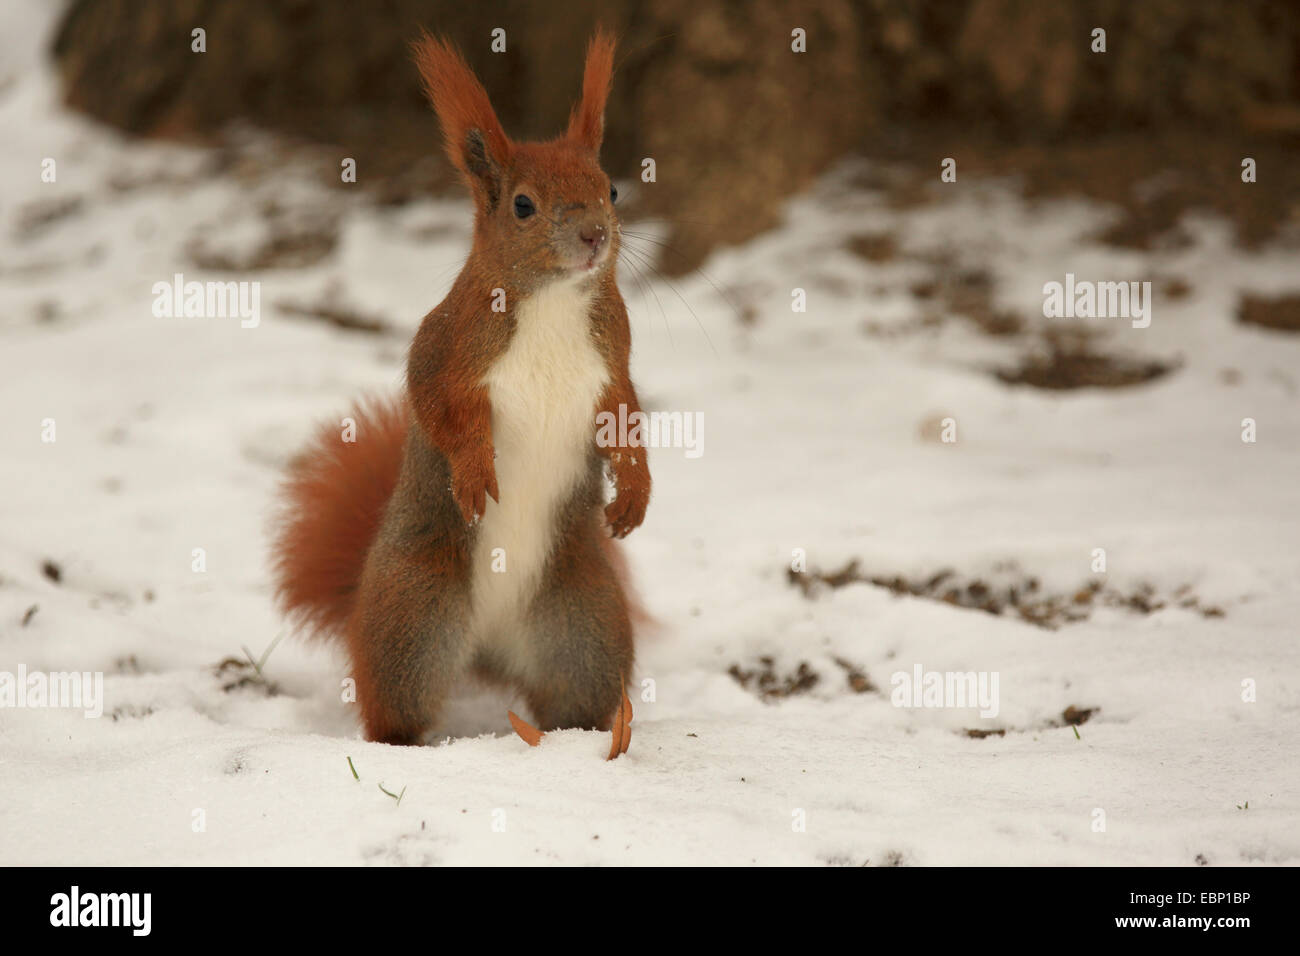 European red squirrel, Eurasian red squirrel (Sciurus vulgaris), standing on the hind legs in the snow, Germany, Saxony Stock Photo